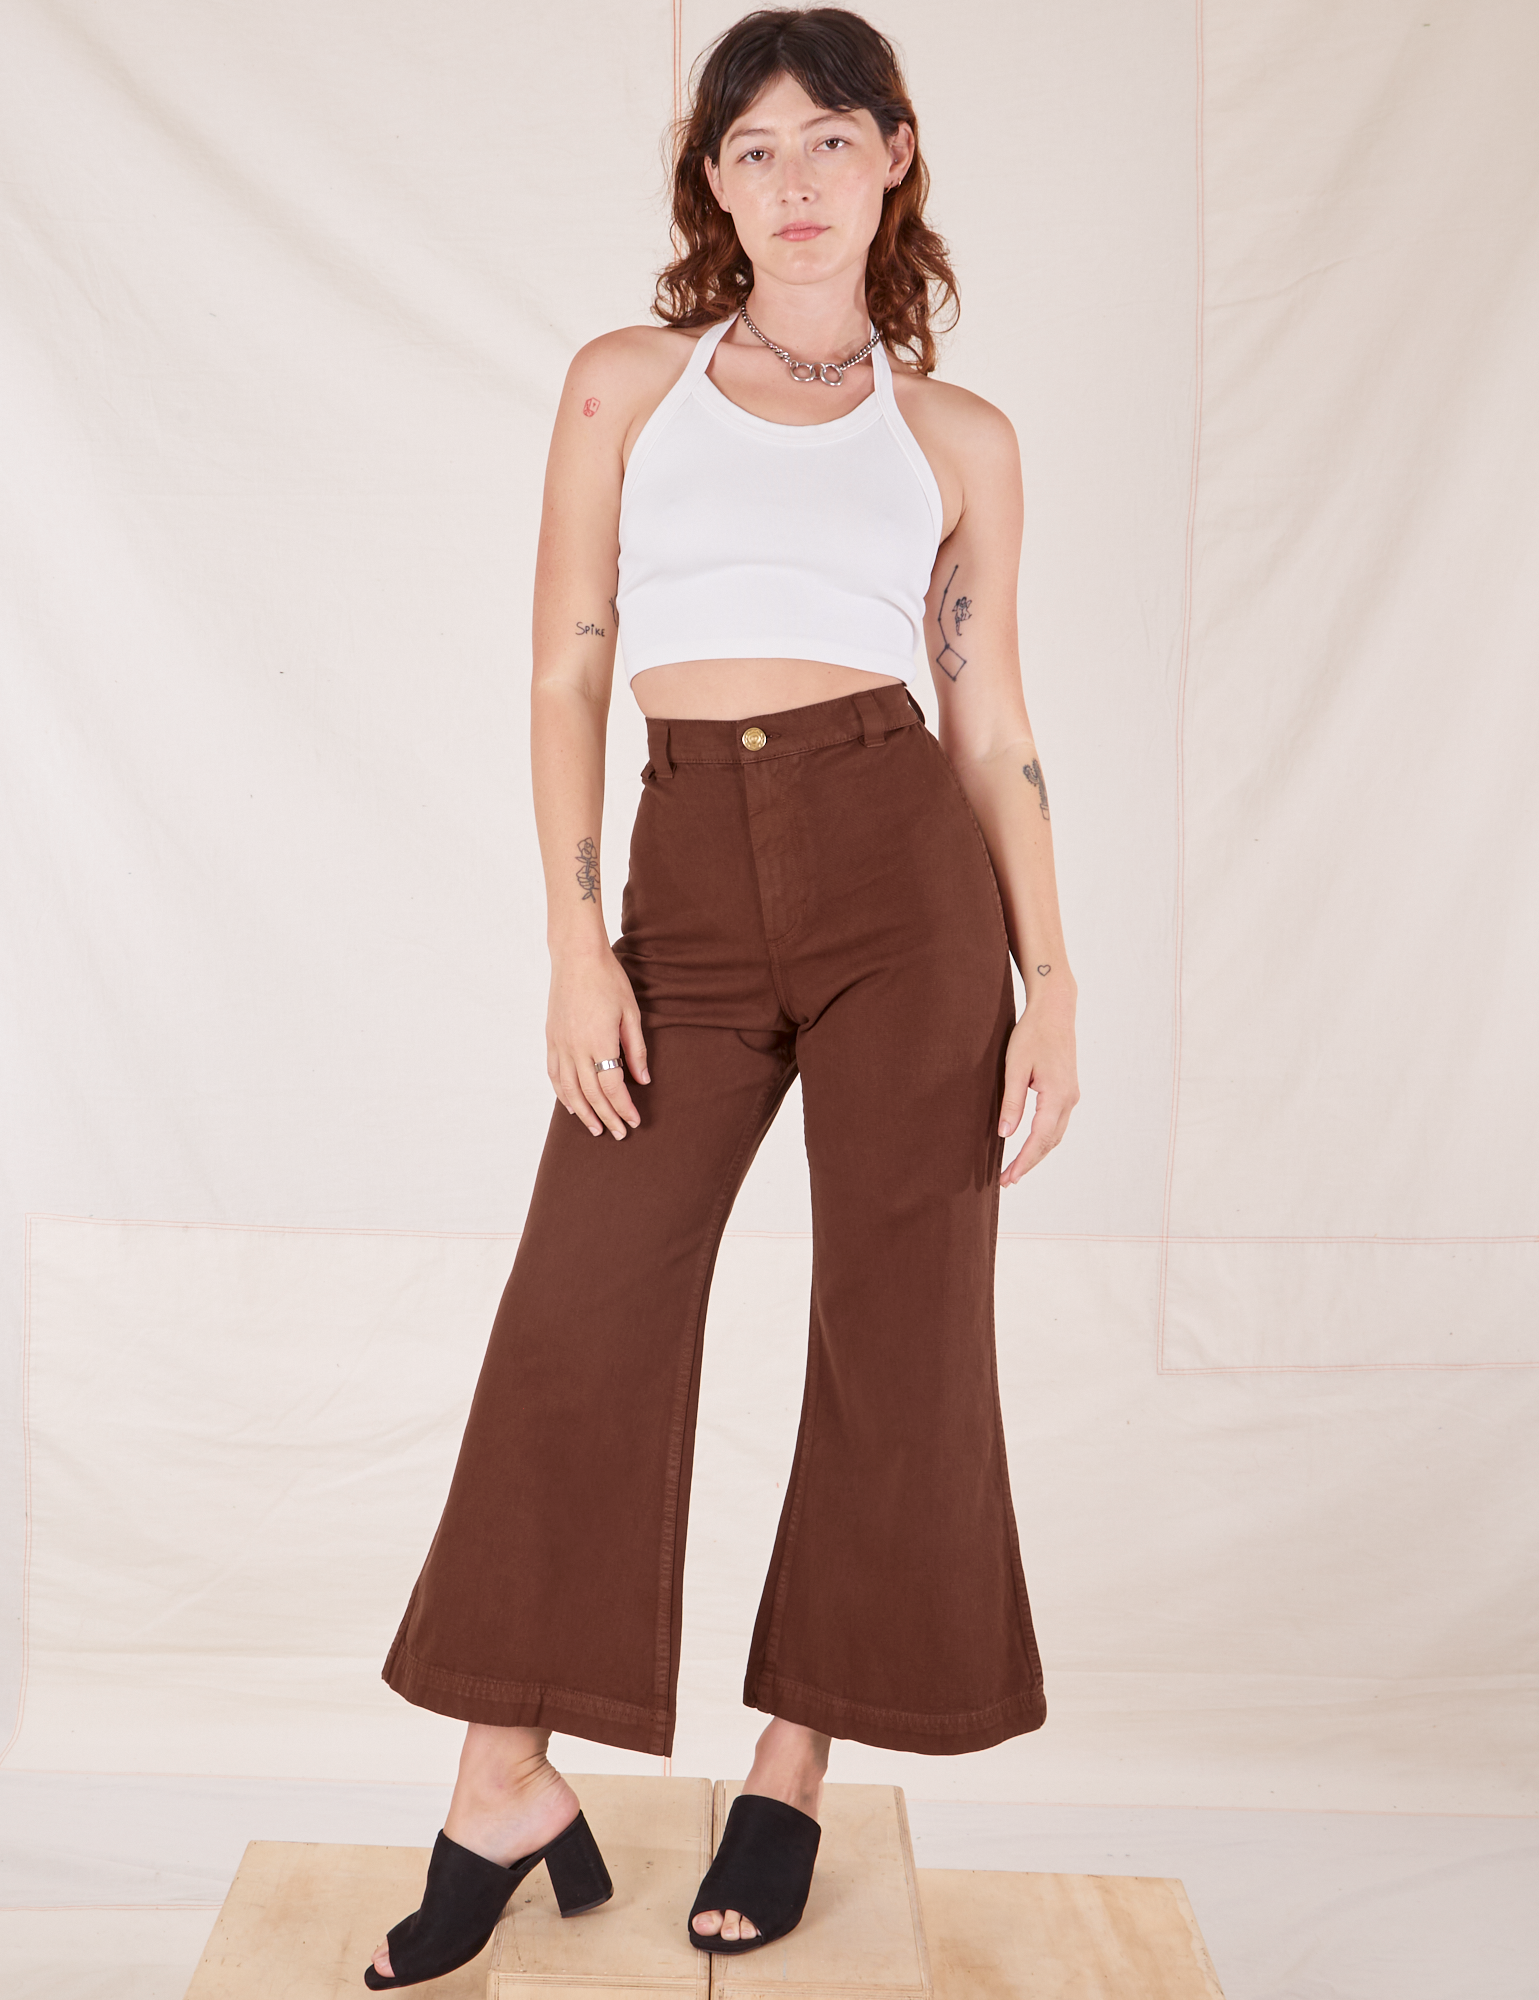 Alex is 5'8" and wearing XXS Bell Bottoms in Fudgesicle Brown paired with a Halter Top in vintage tee off-white